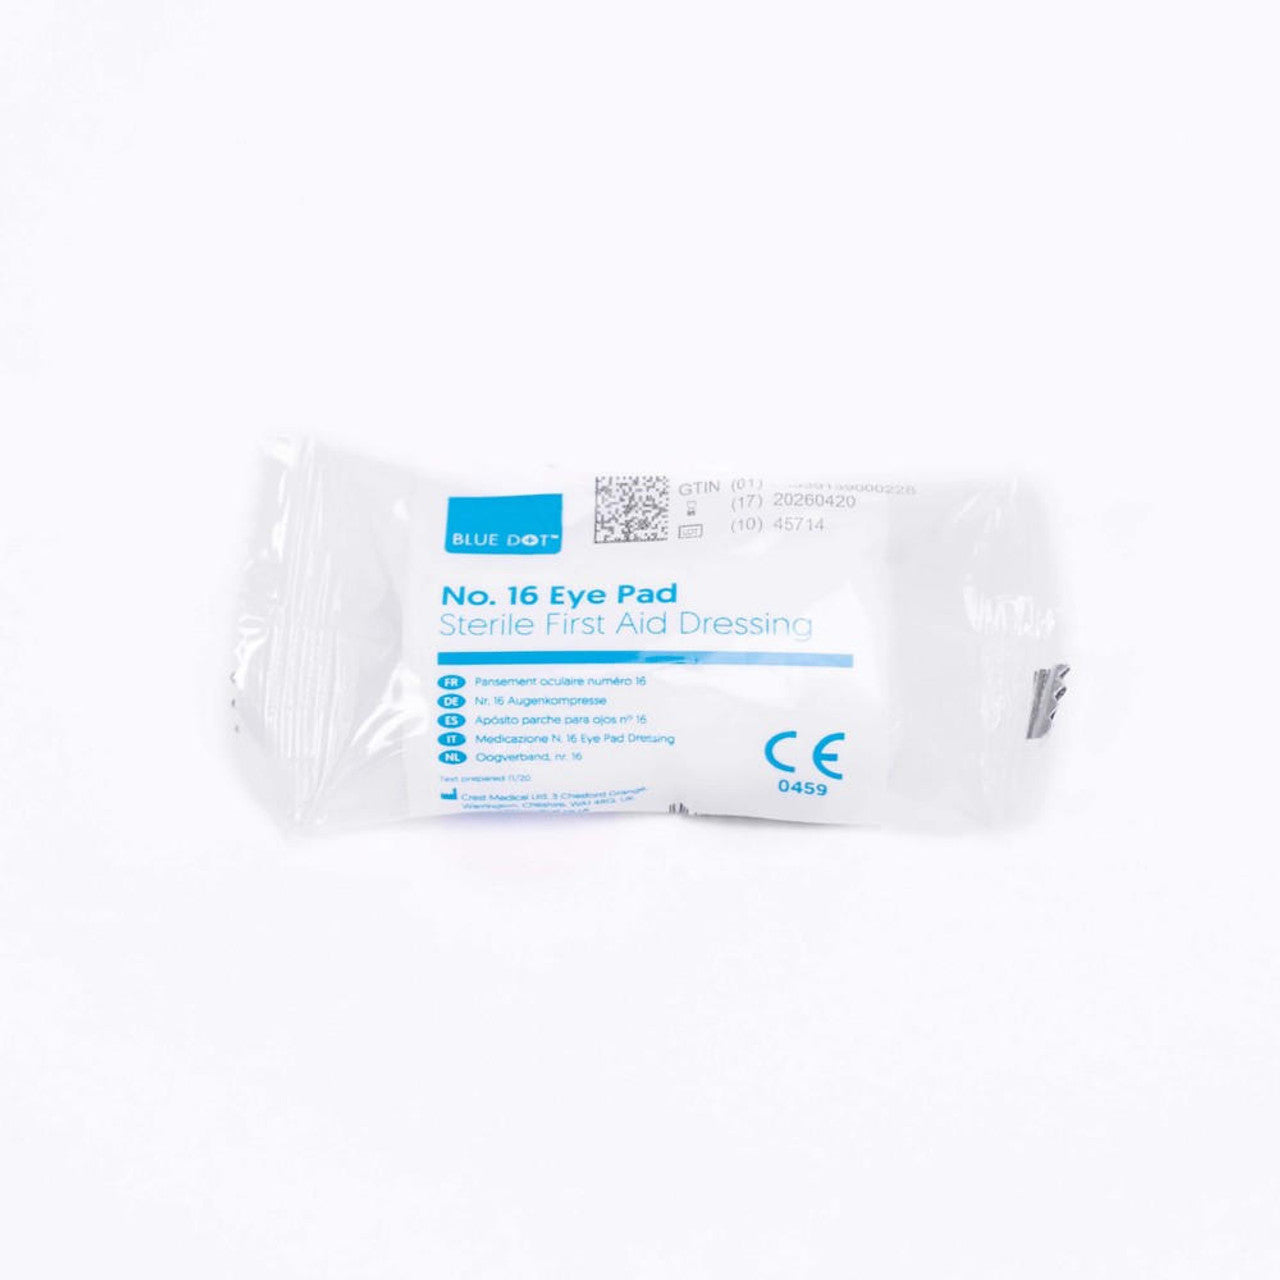 FPG No. 16 Eye Pad Sterile First Aid Dressing